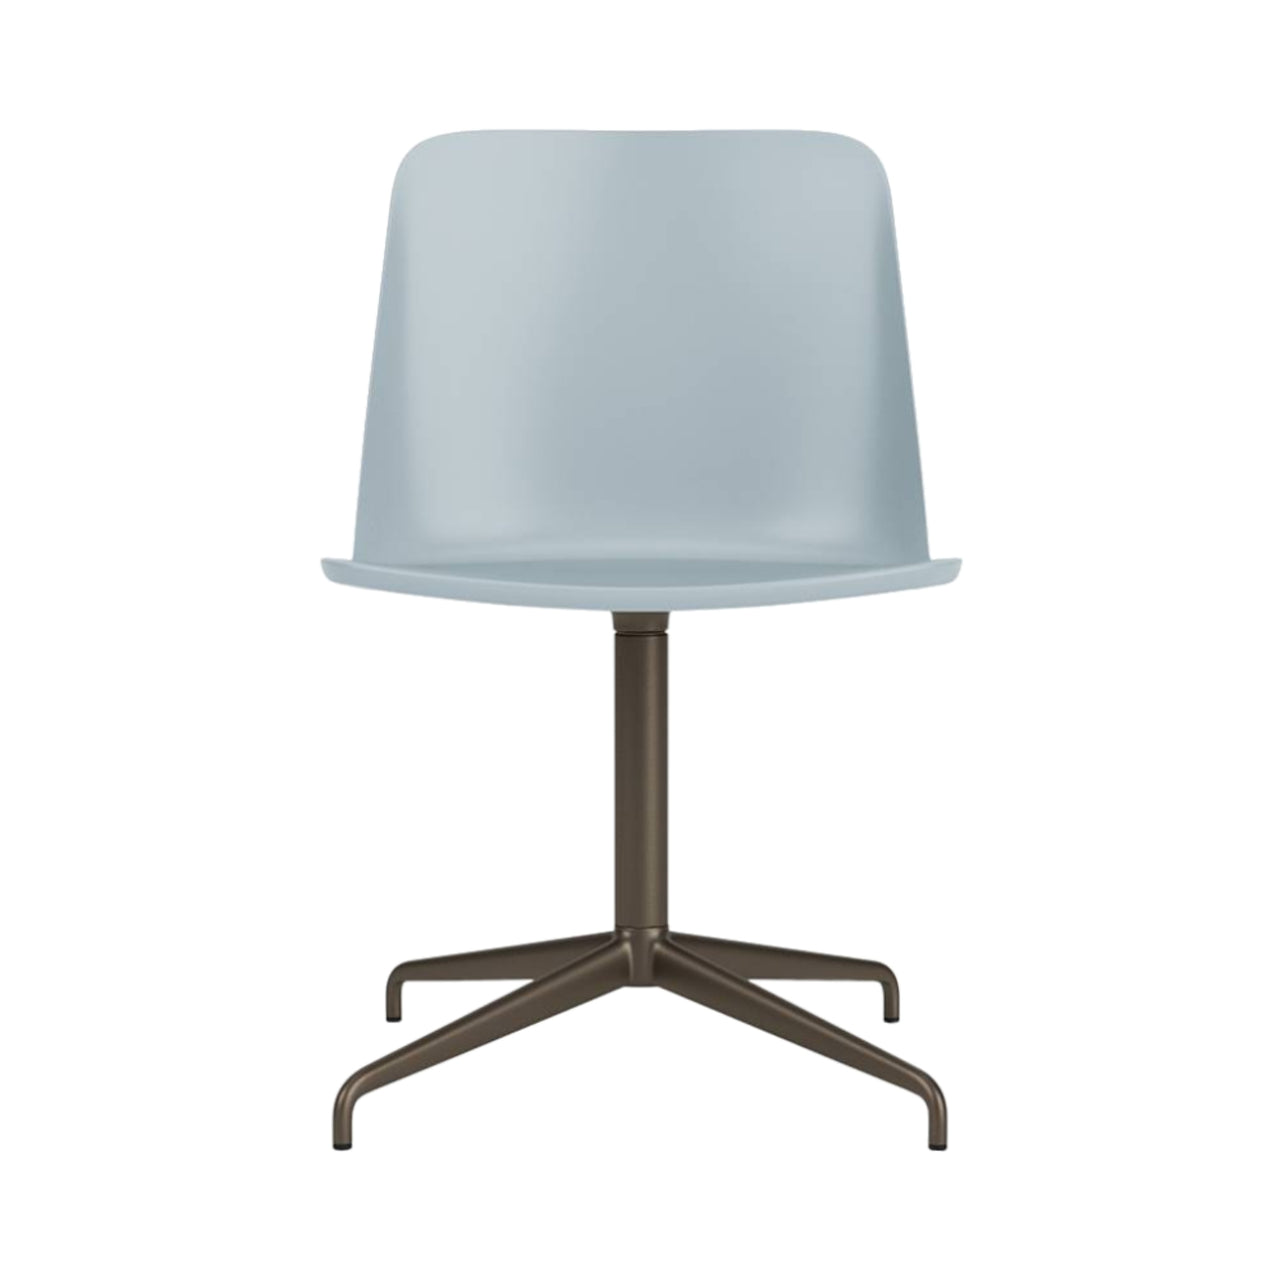 Rely Chair HW16: Light Blue + Bronzed